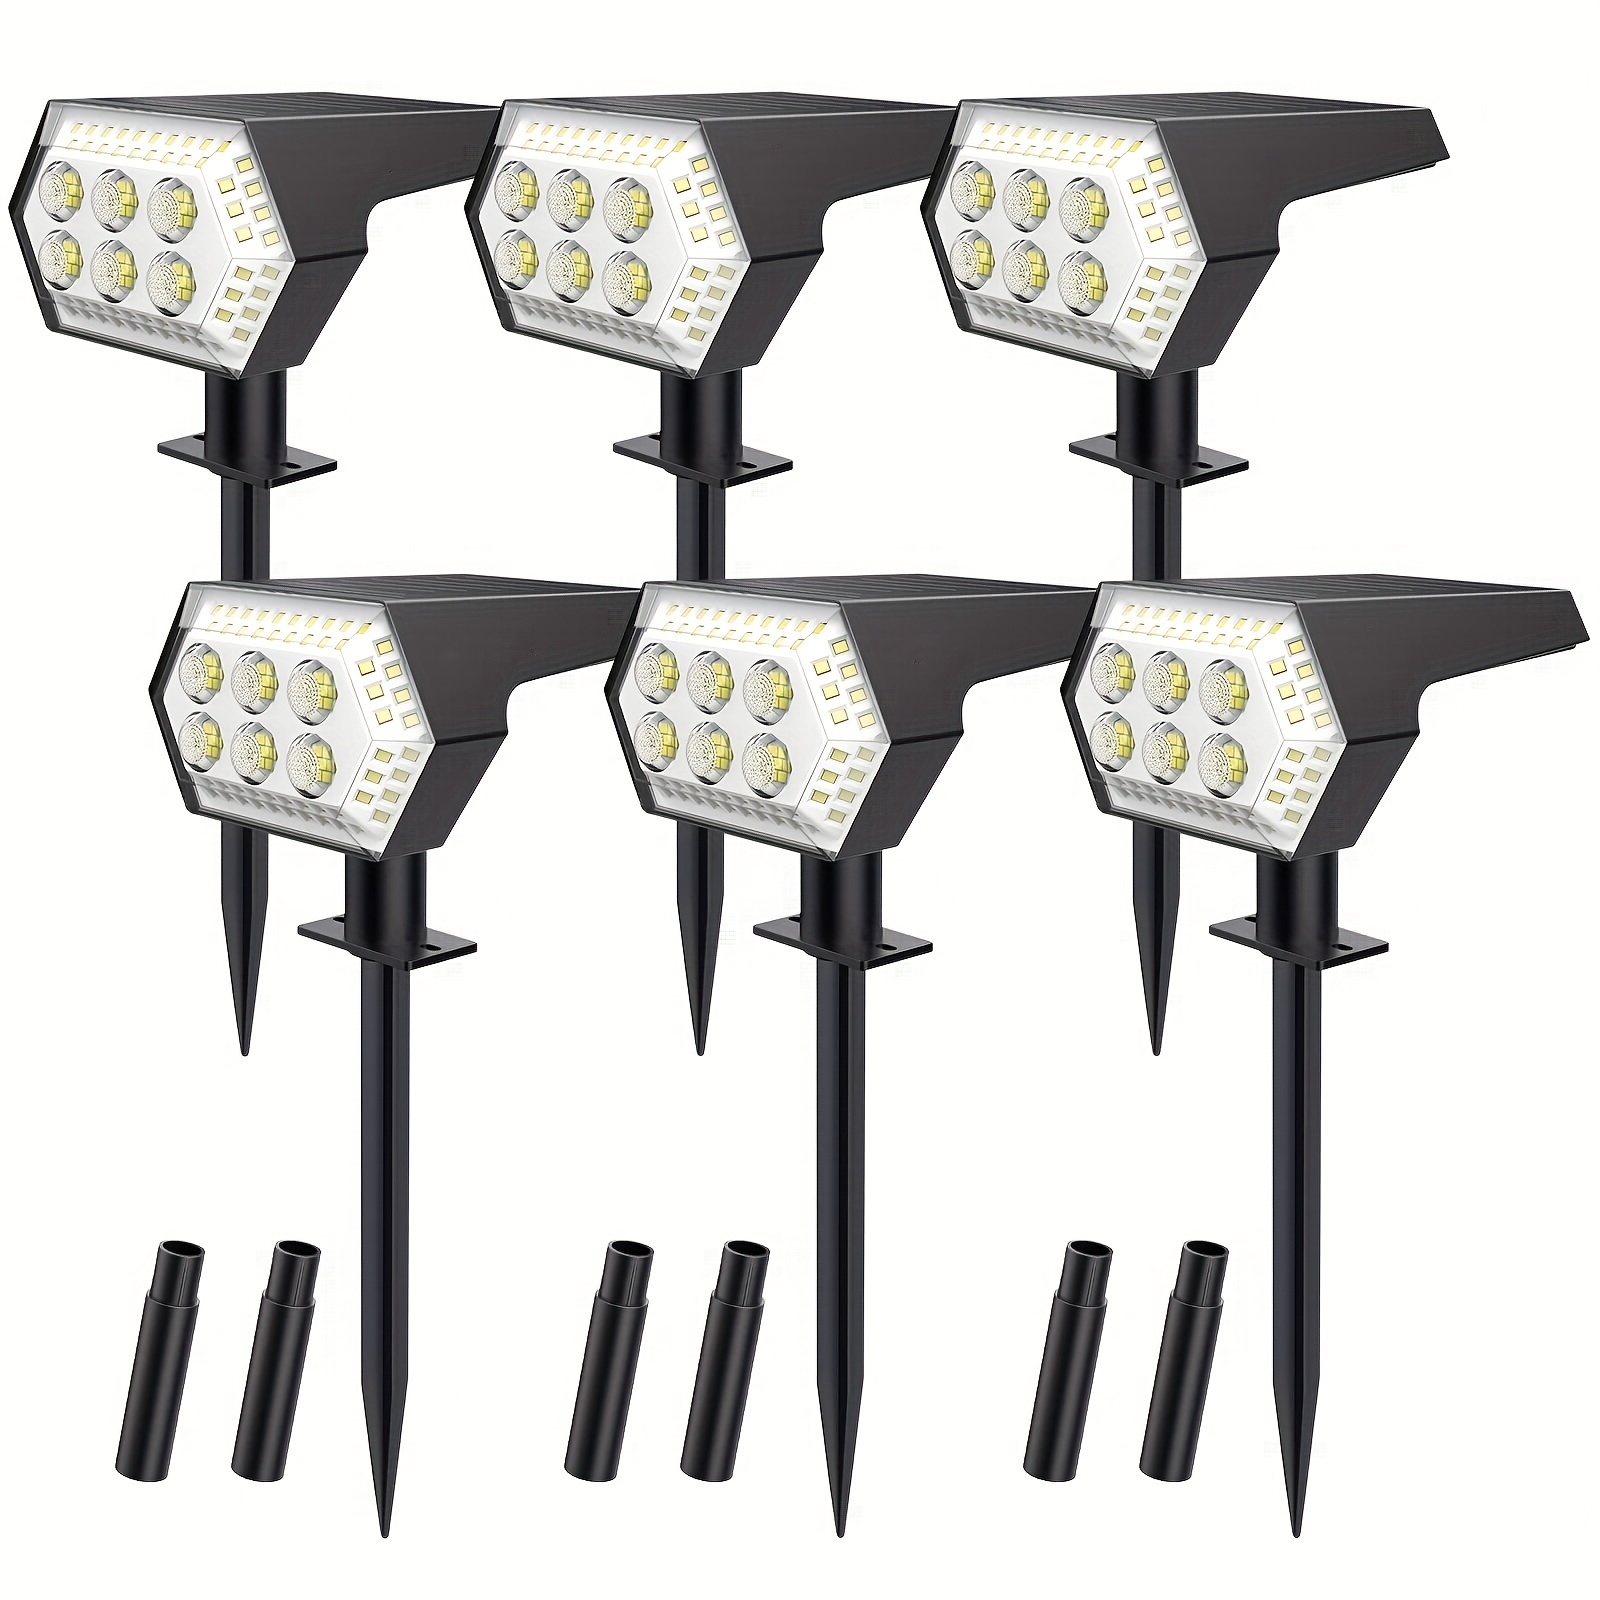 

6 Pack Solar Landscape Spotlights Outdoor, 108 Leds Outdoor Solar Powered Spot Lights With 4 Bright Modes, Wall & Ground Mounted, Cold White